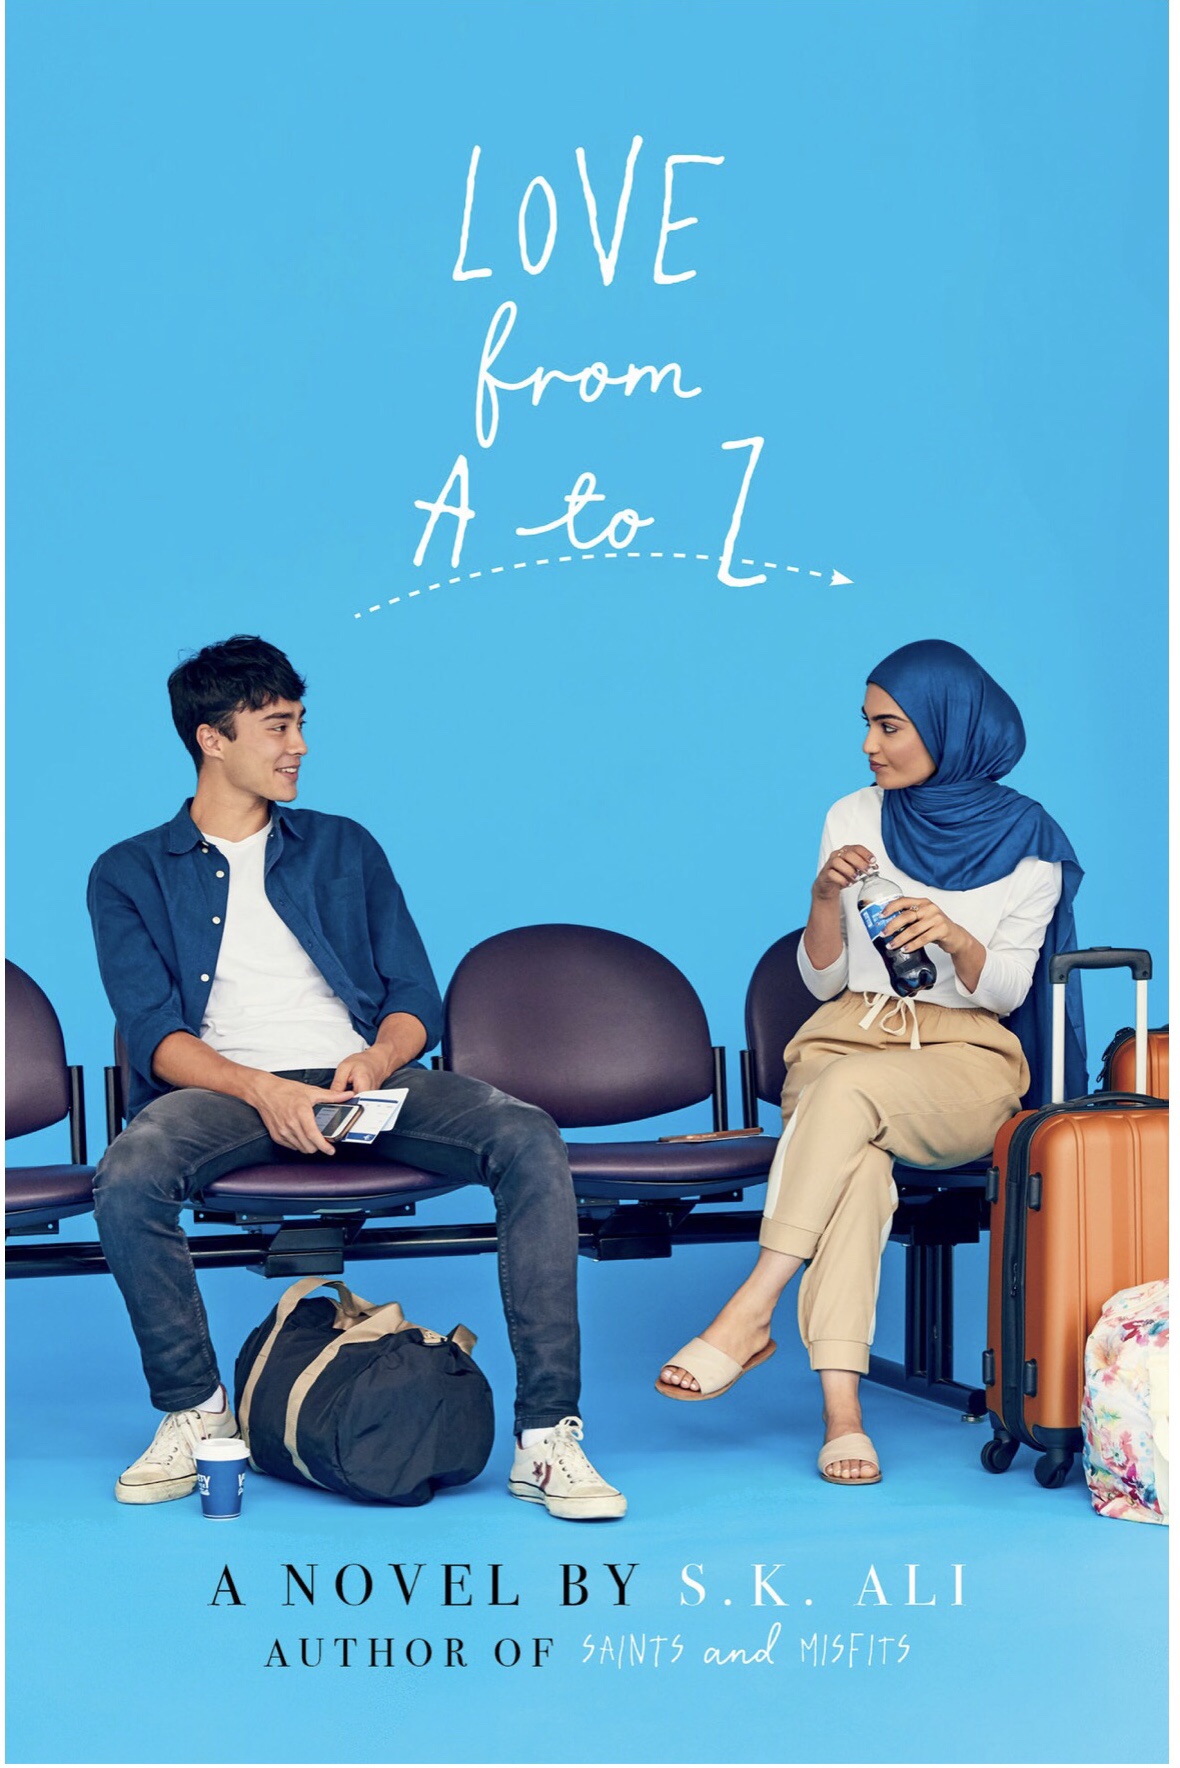 Cover image for Love from A to Z, with the two protagonists seated in chairs looking at each other.